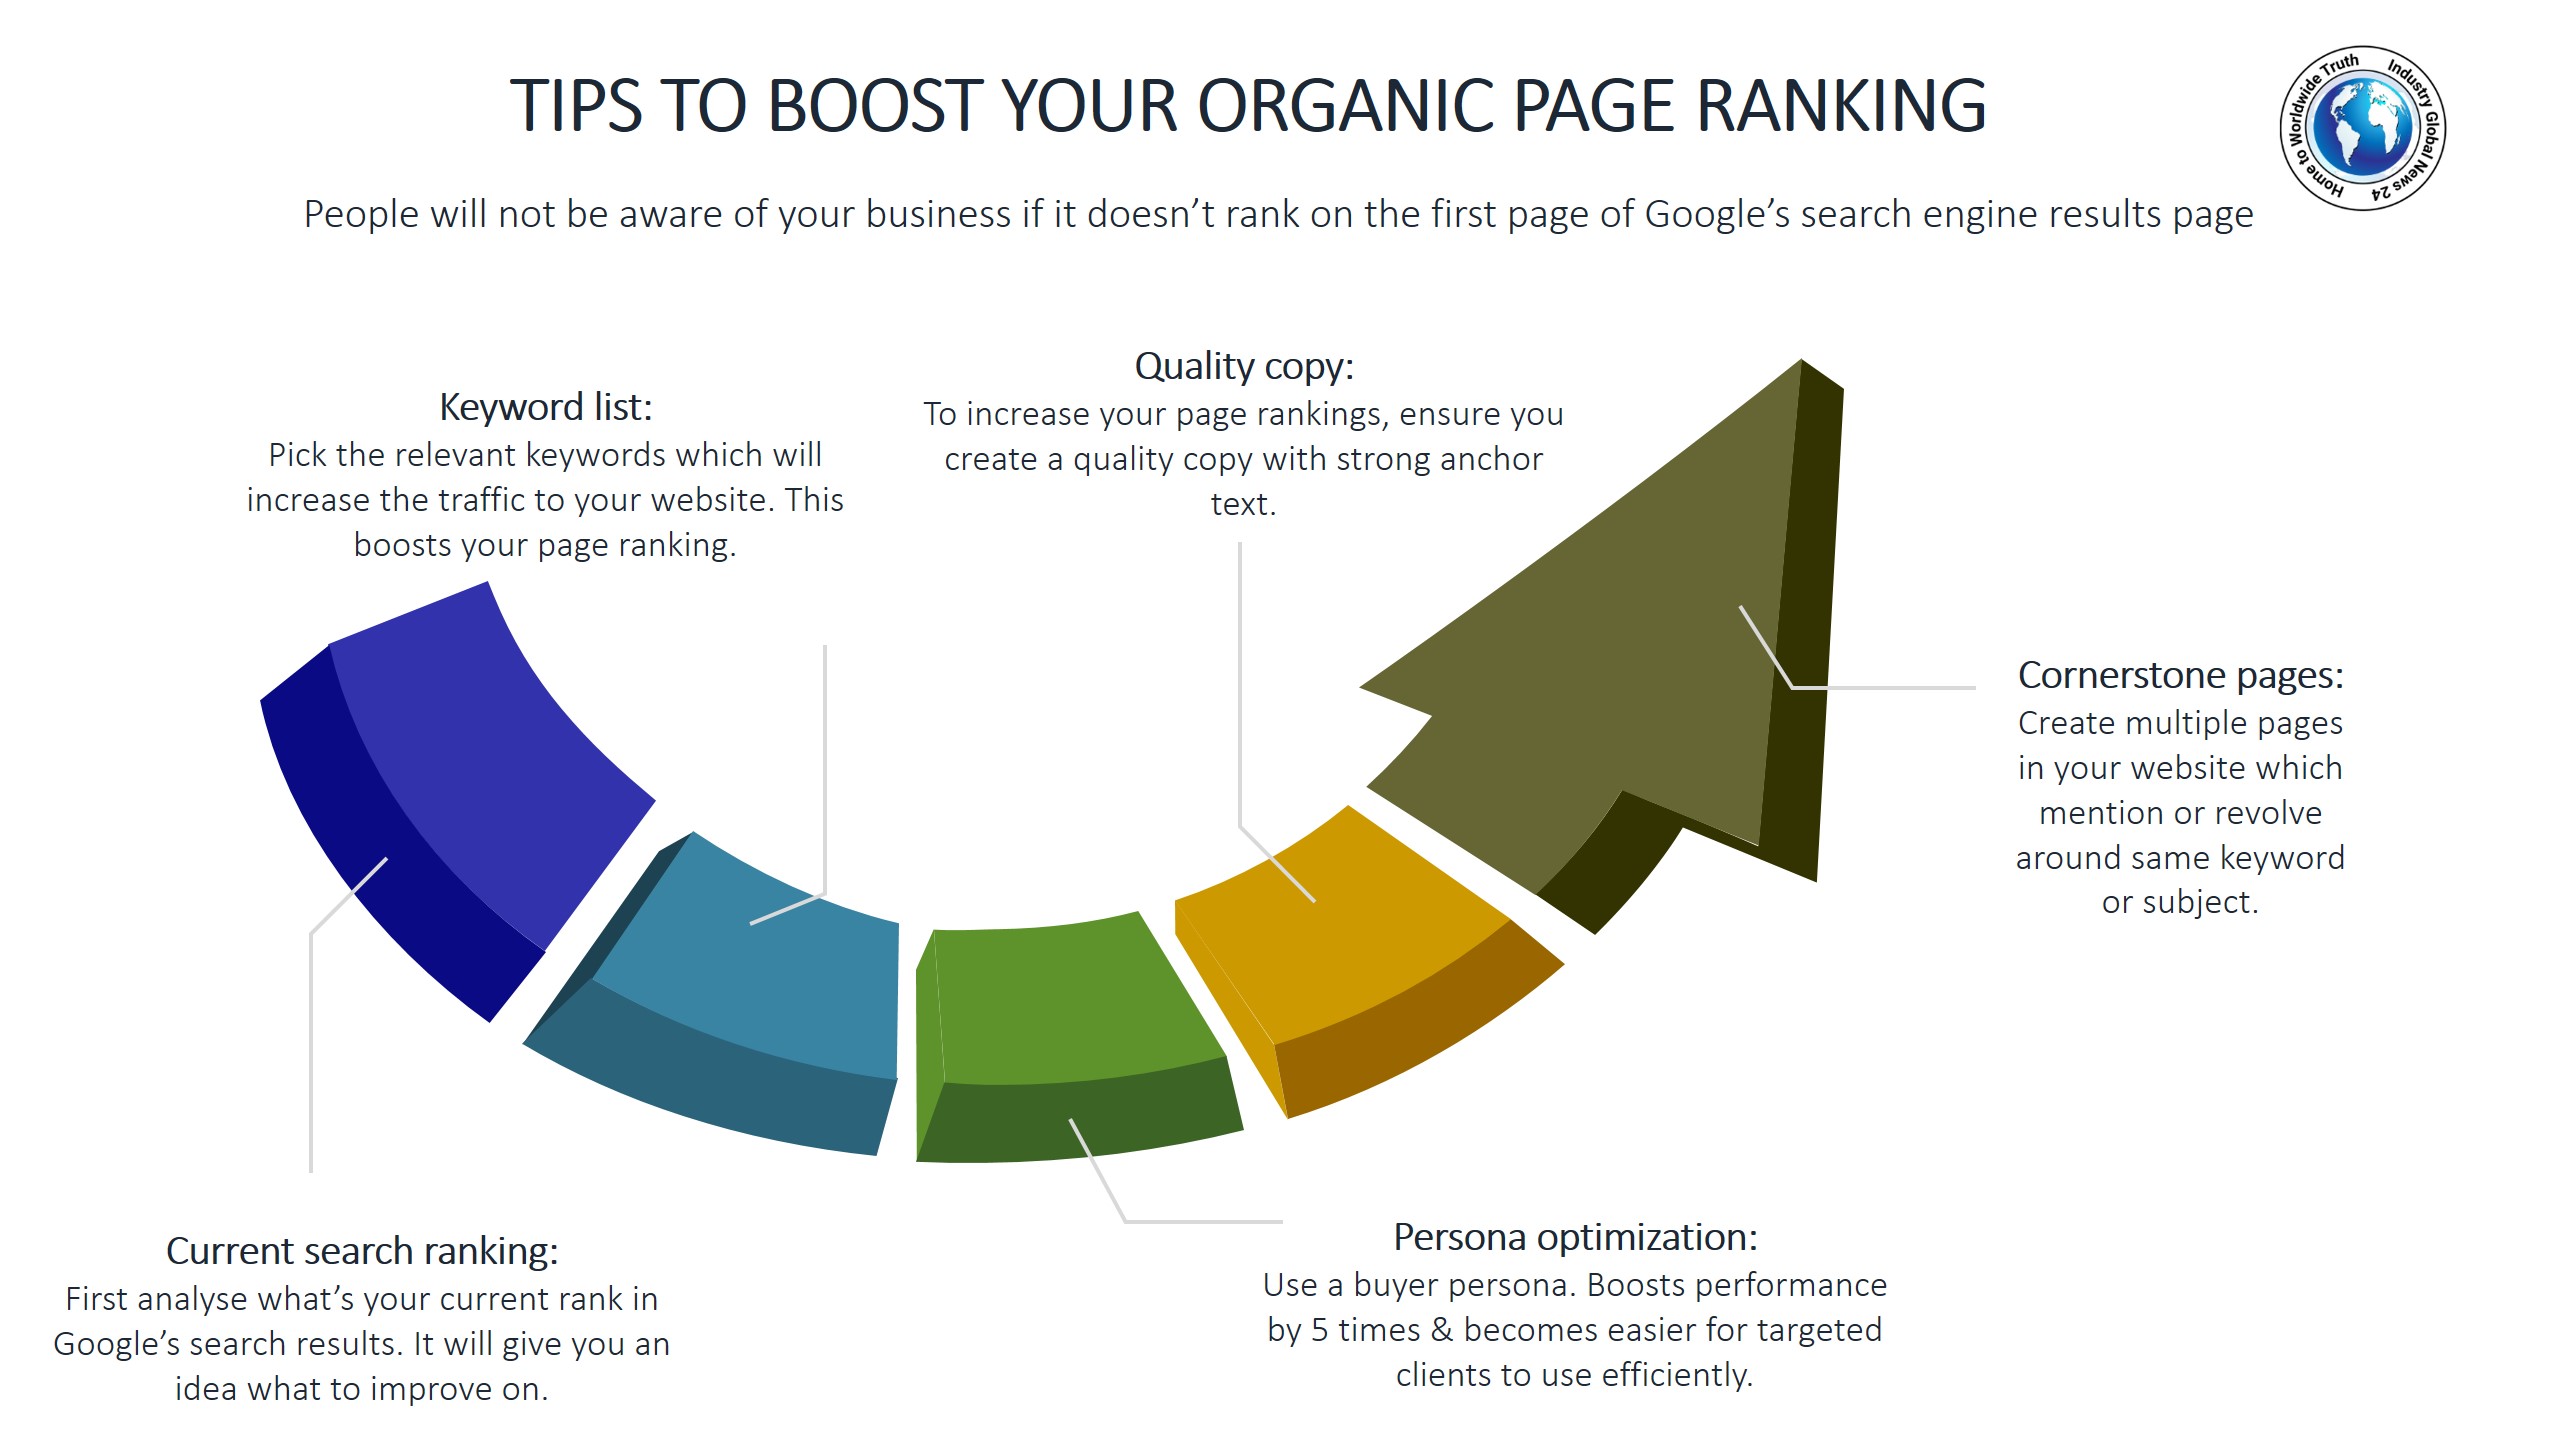 Tips to boost your organic page ranking